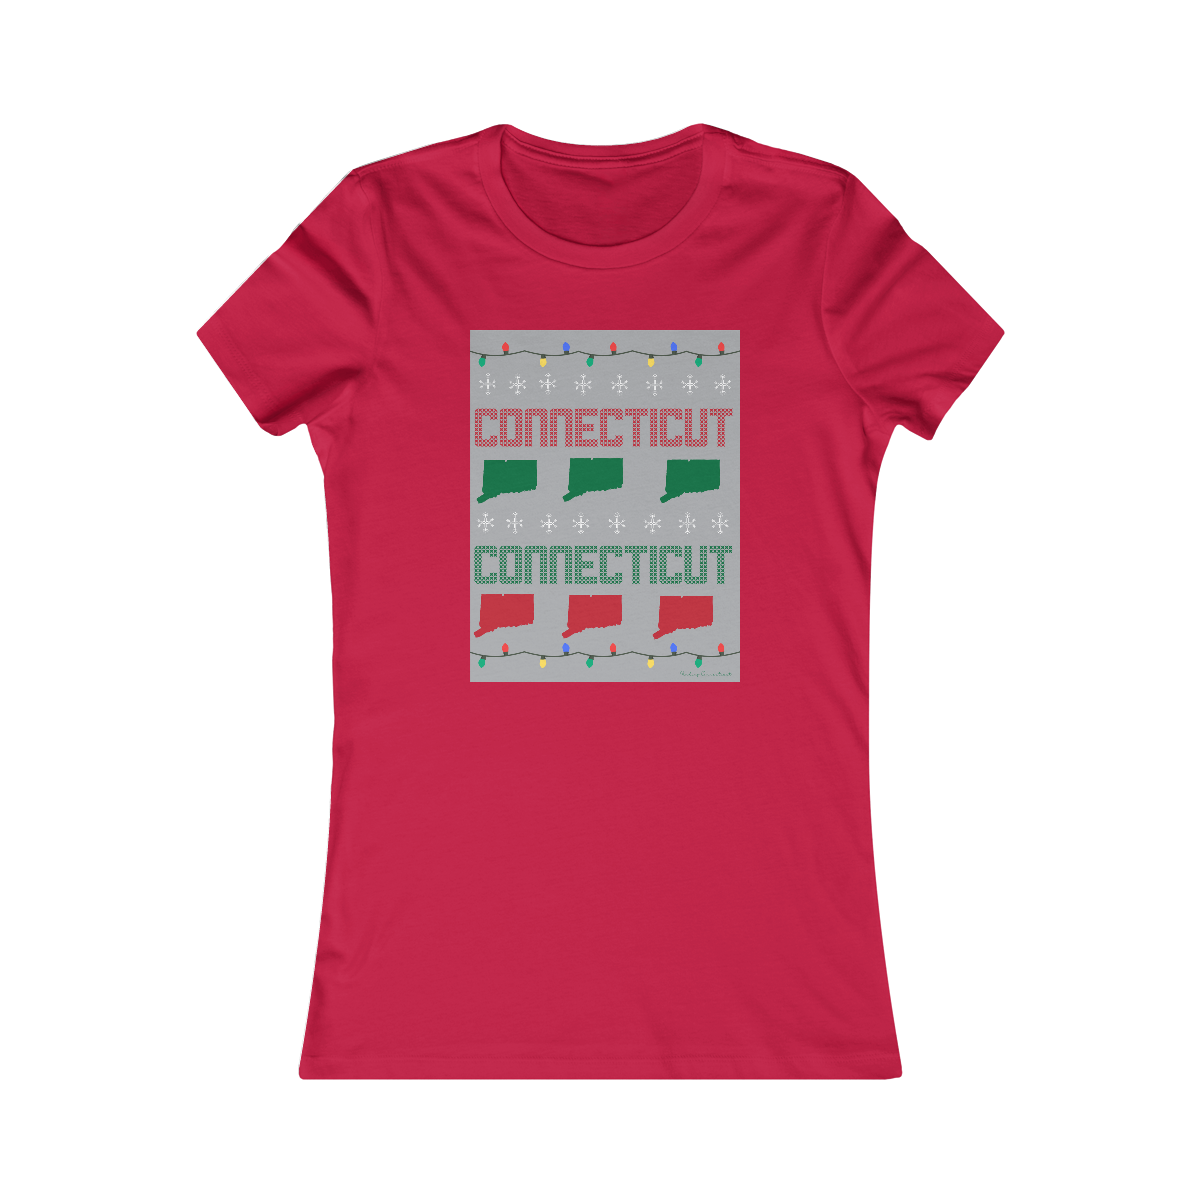 connecticut ugly holiday tee shirt 